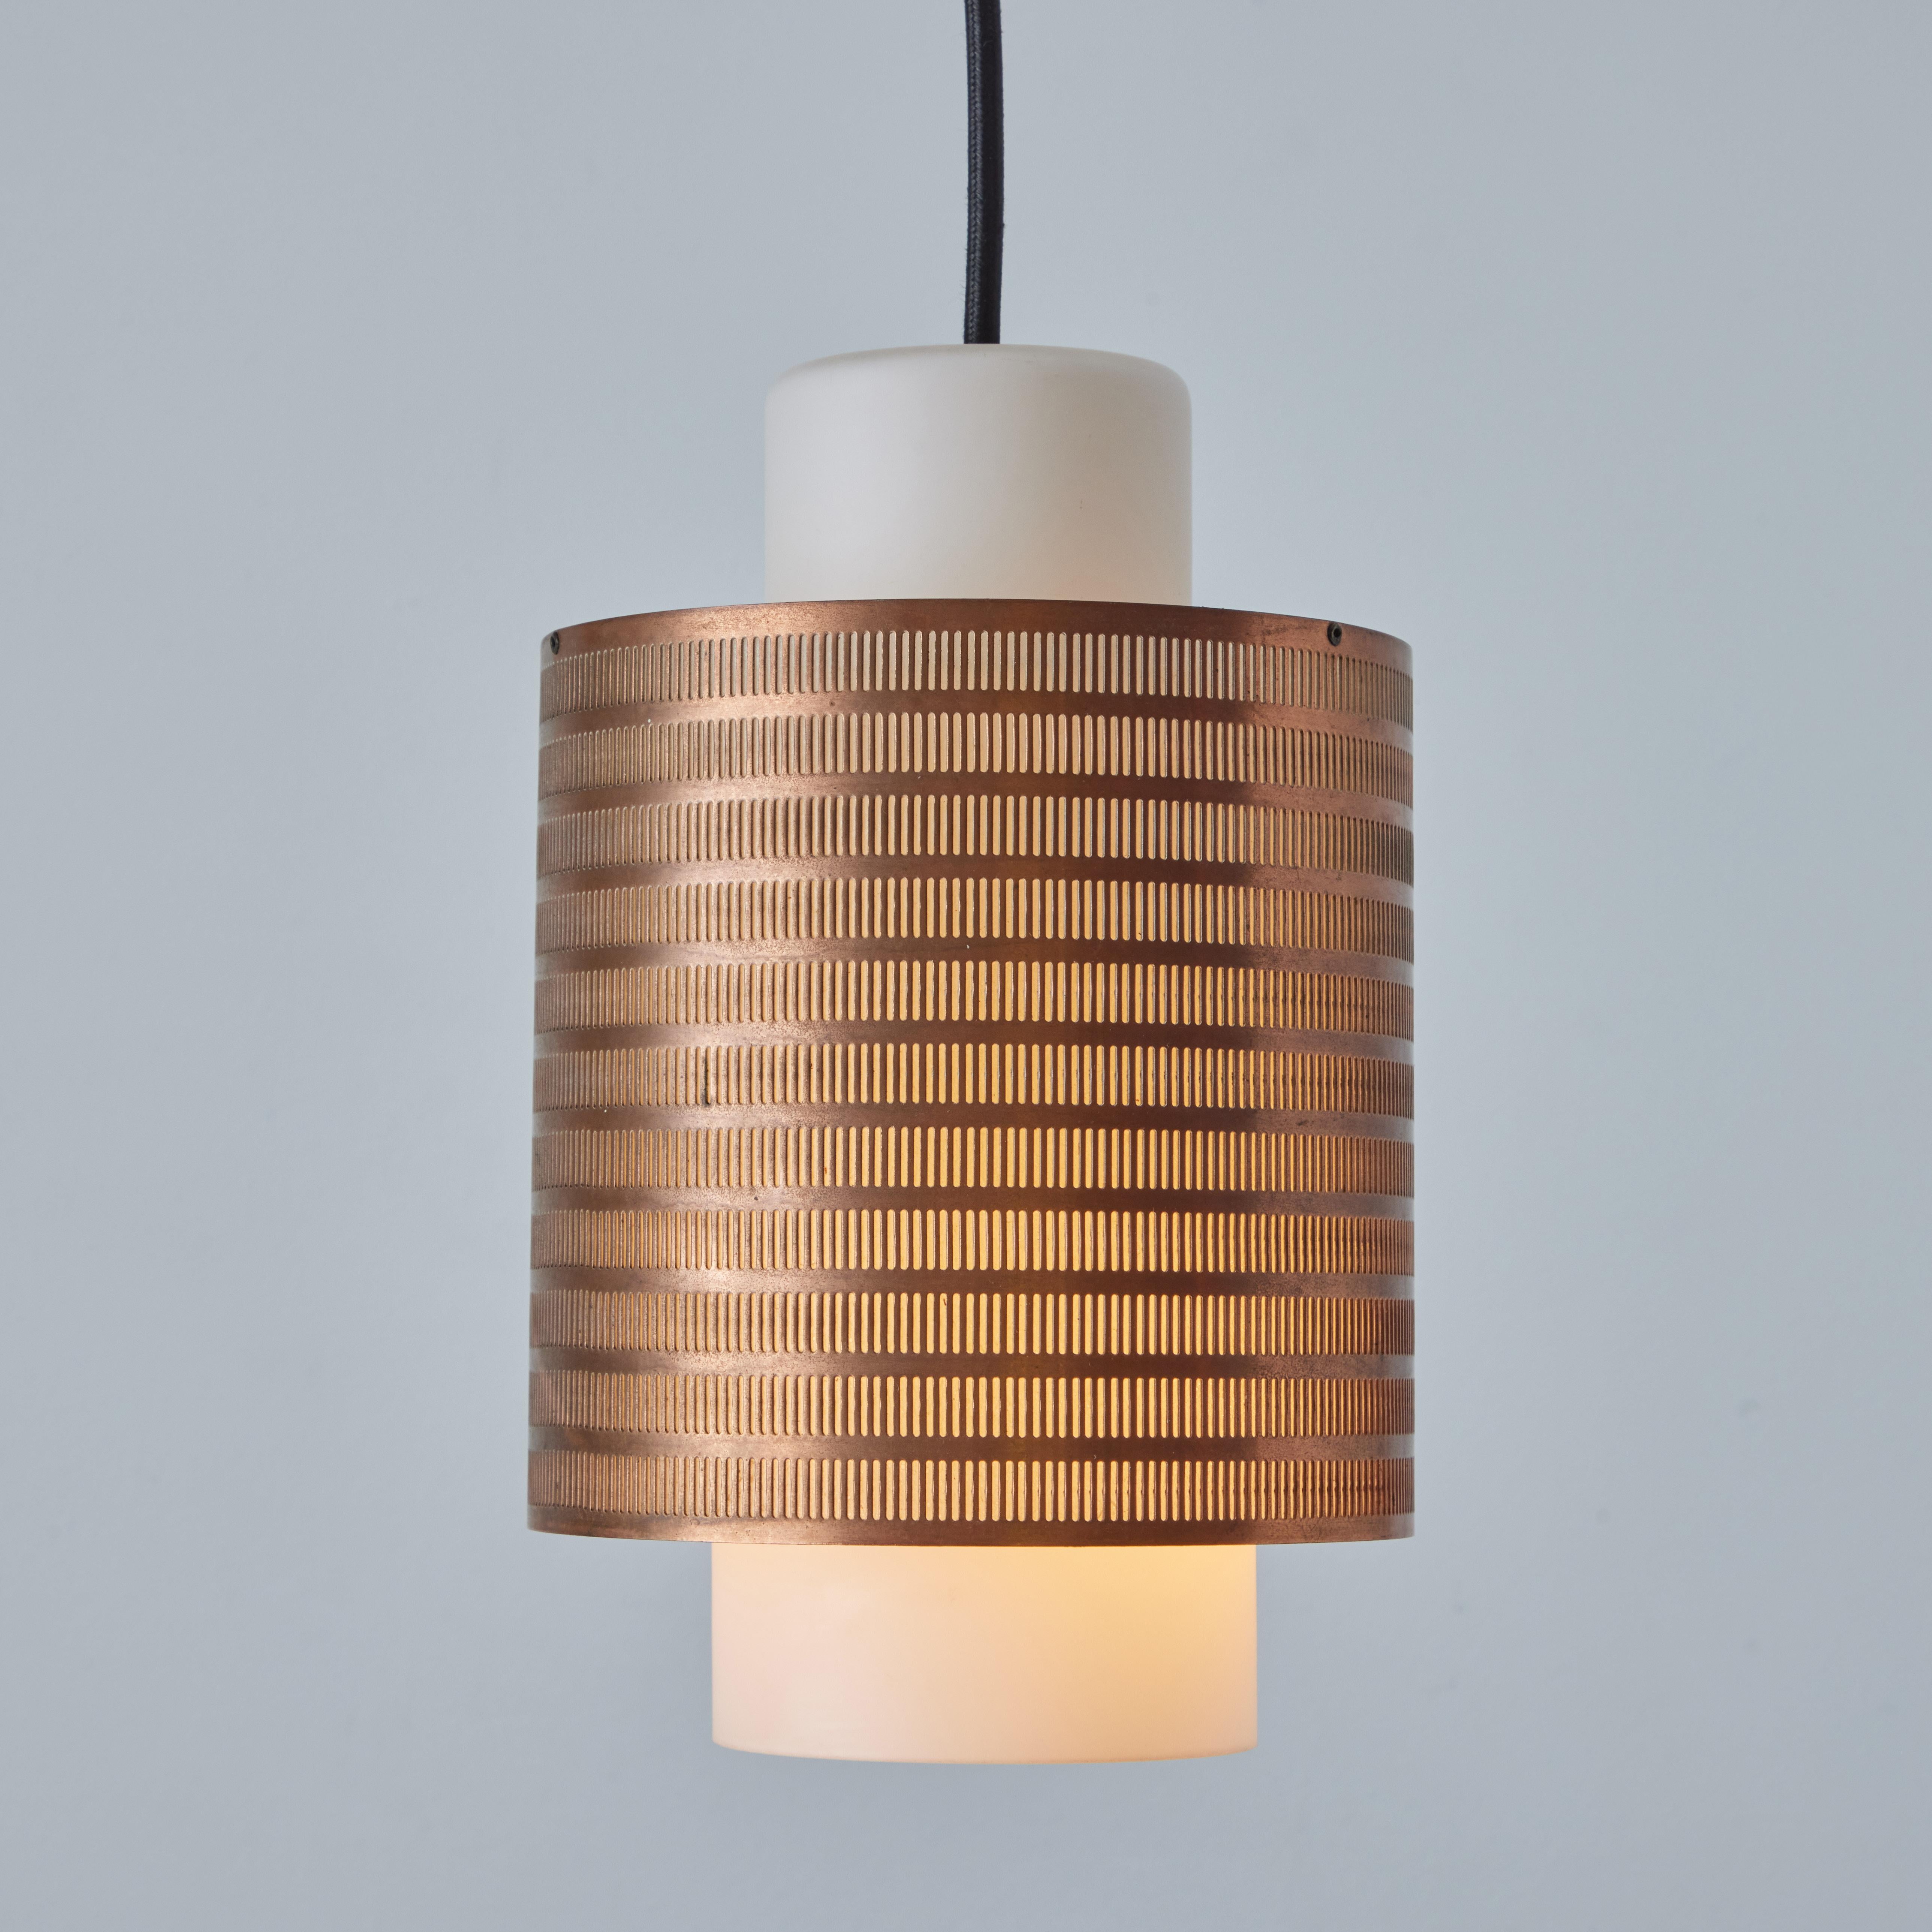 1960s Danish Modern Perforated Copper and Glass Pendant Attributed to Lyfa For Sale 2